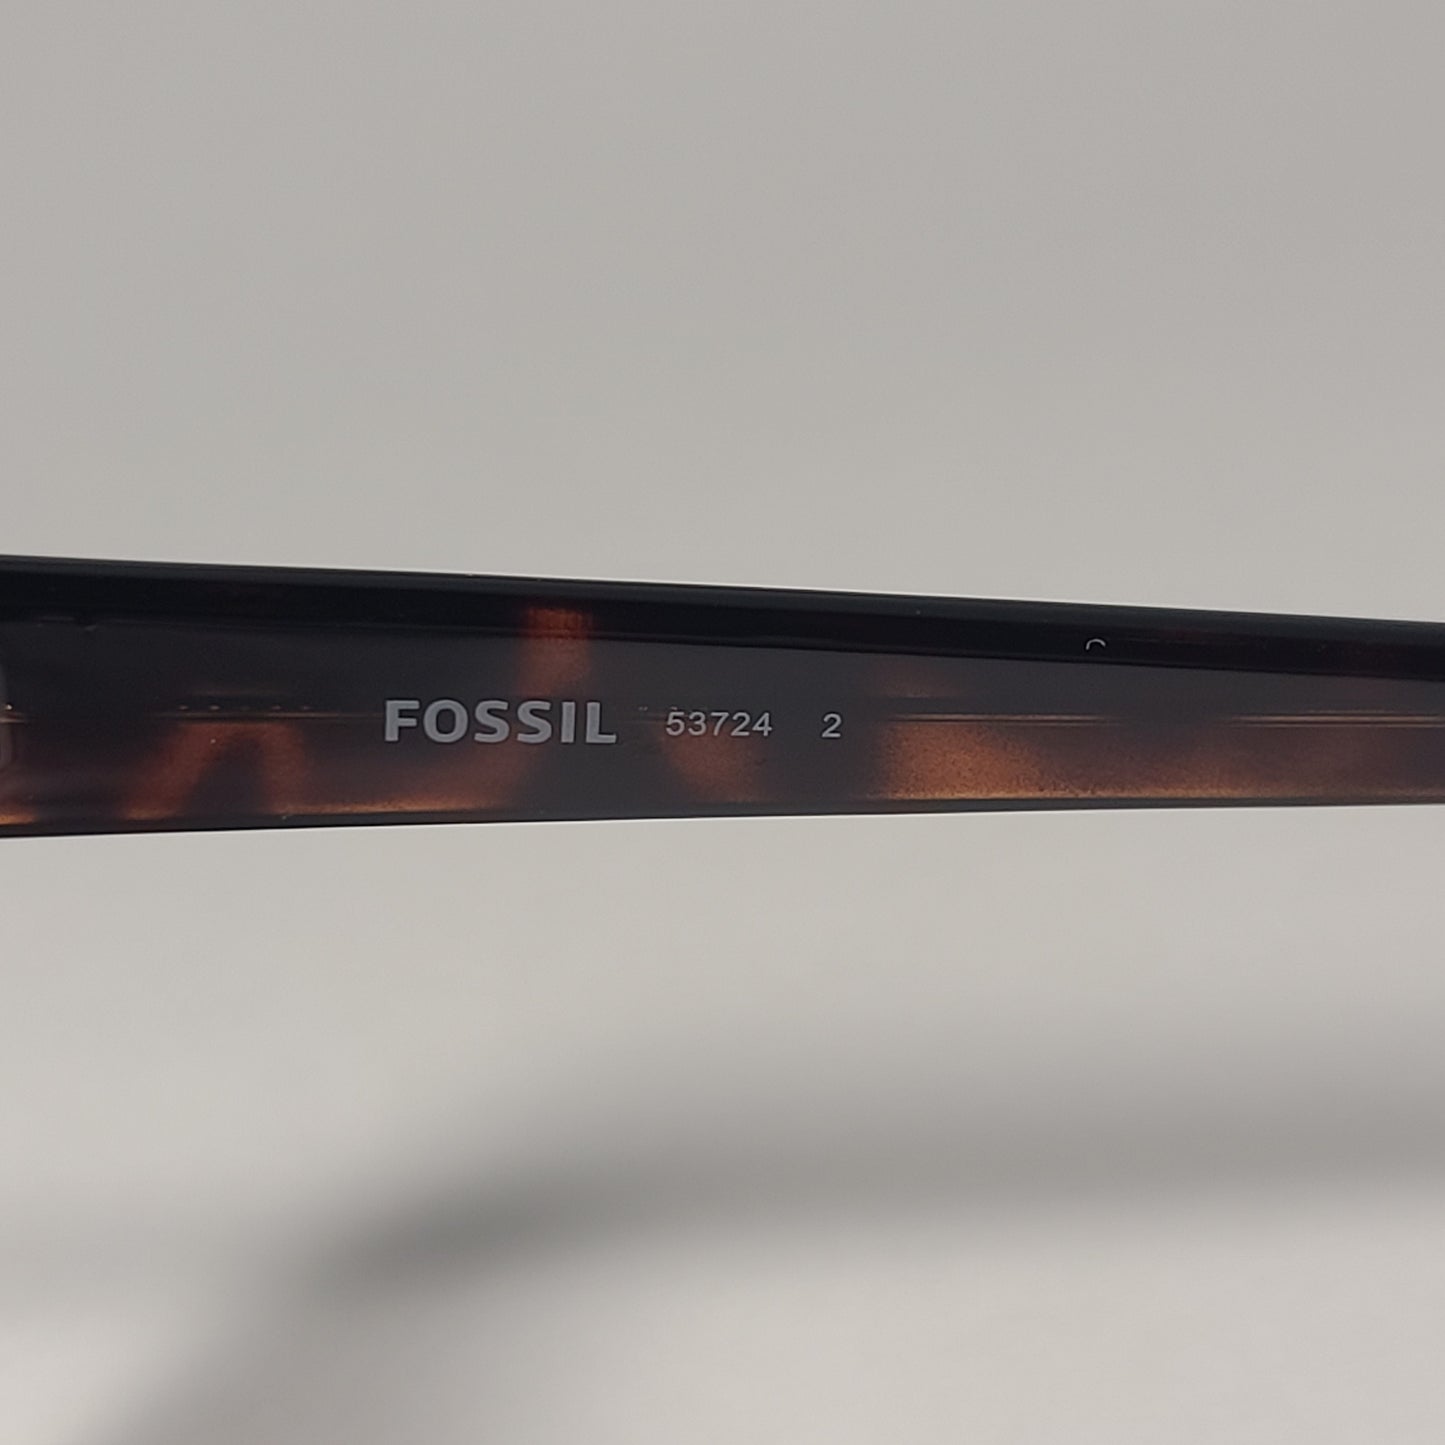 Fossil FW114 Large Square Sunglasses Brown Tortoise Frame Brown Gradient Lens - Sunglasses